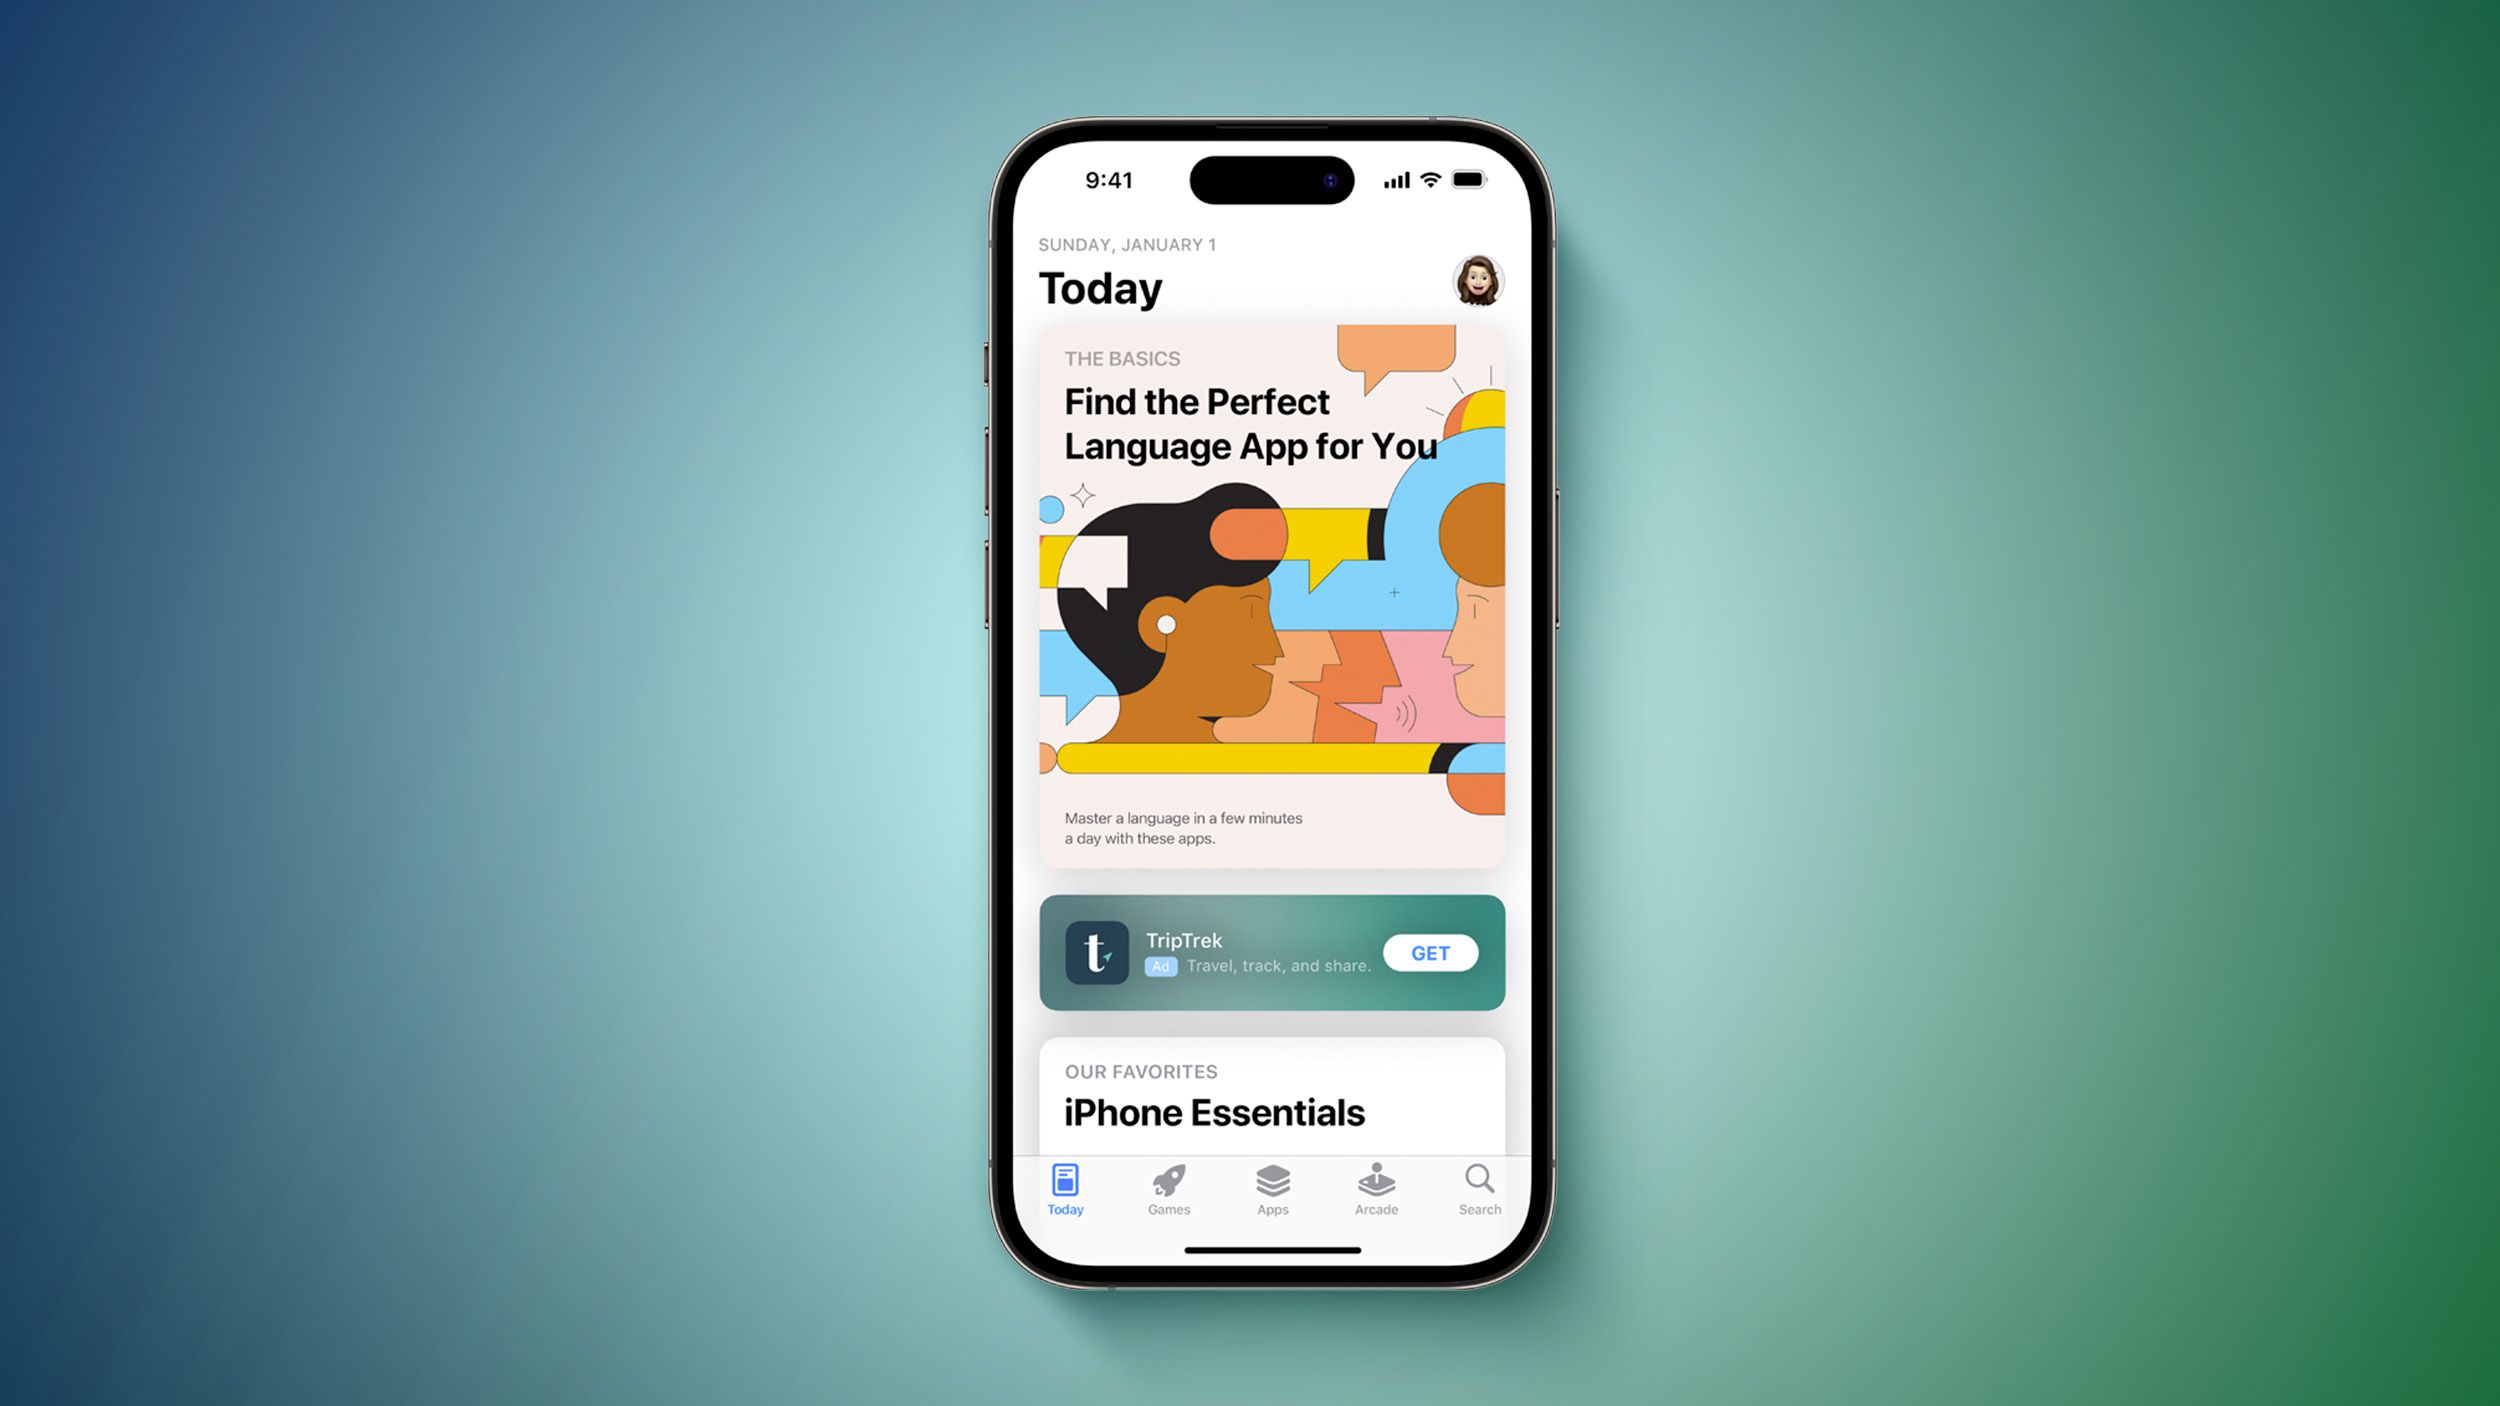 App Store Ads in Today Tab Switching to More Compact Design in July - macrumors.com